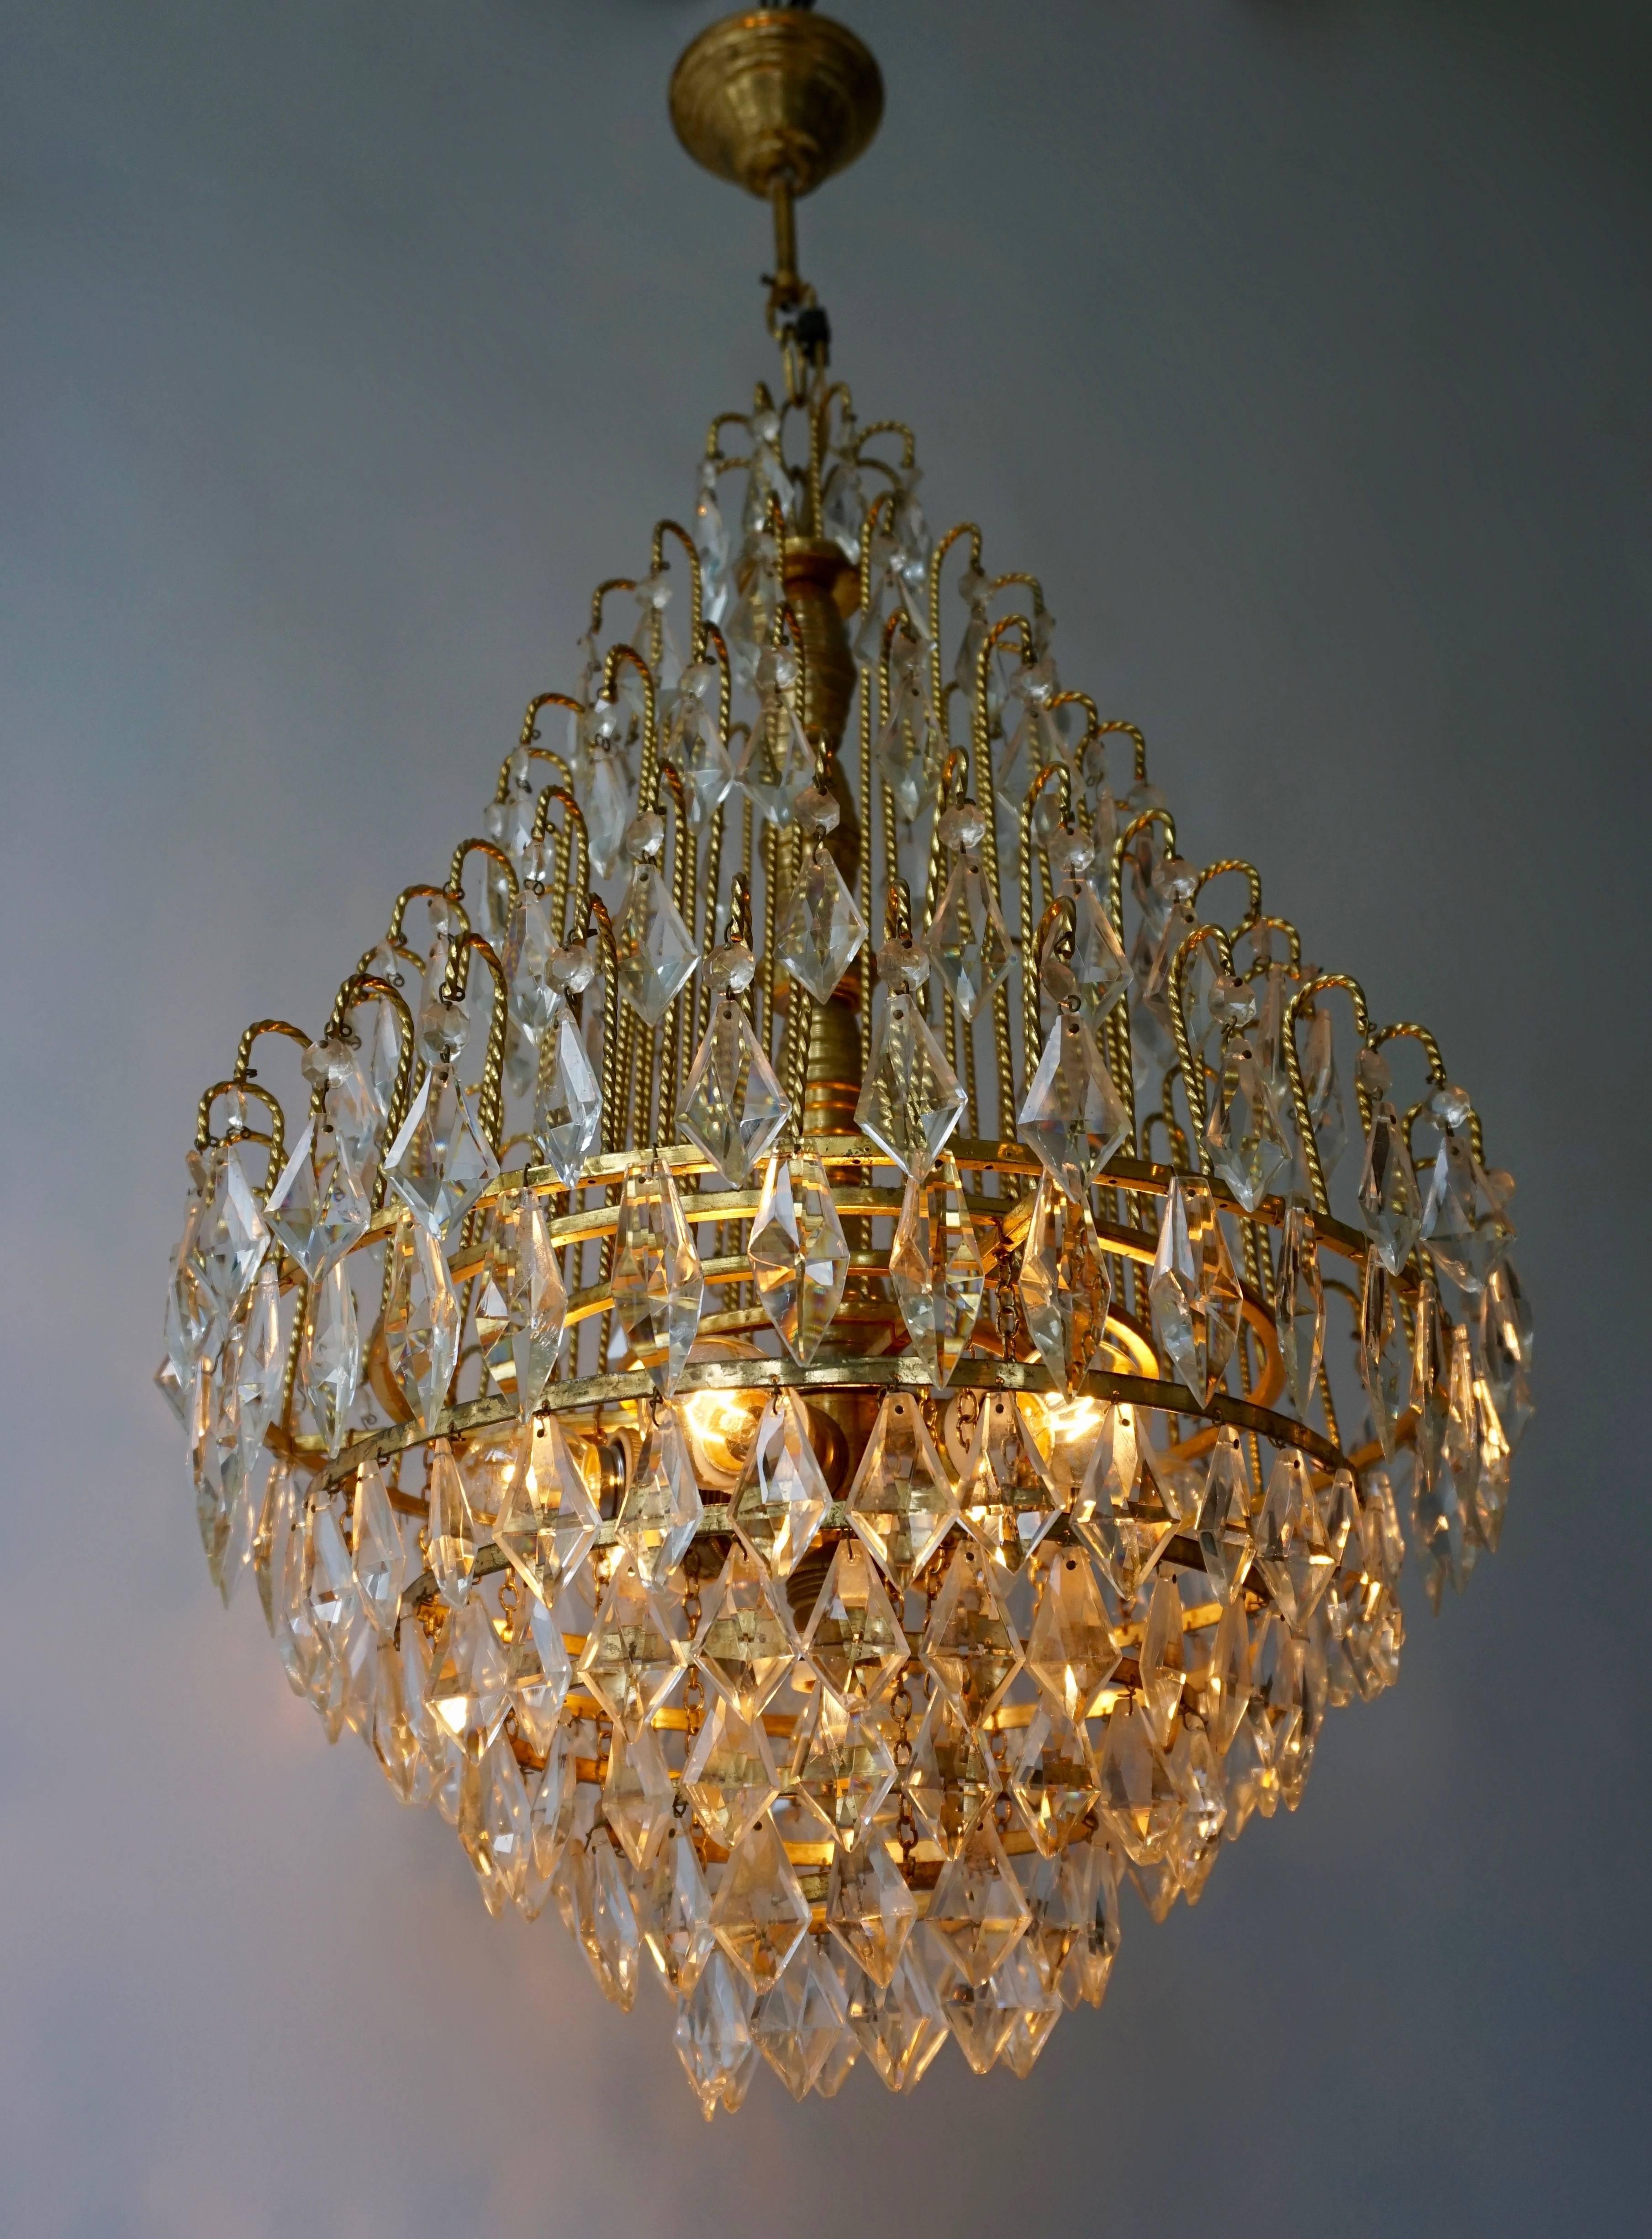 Elegant brass and crystal chandelier with seven E27 bulbs.
Diameter 48 cm.
Height with chain 80 cm.
Height fixture 62 cm.